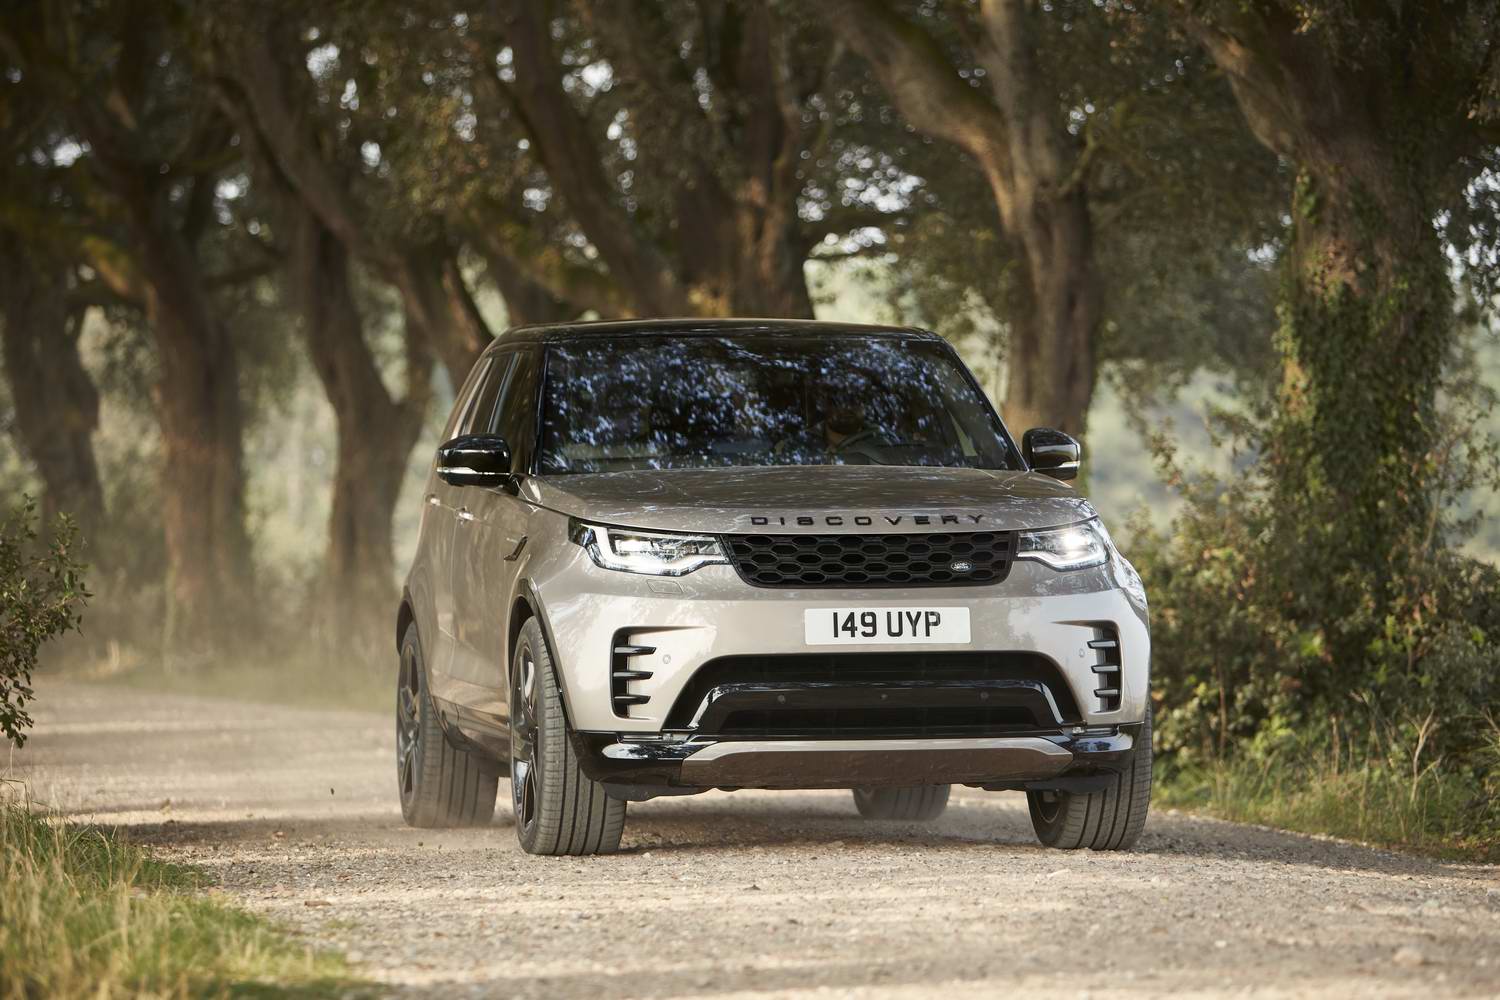 Land Rover shows off 2021 Discovery - car and motoring news by CompleteCar.ie